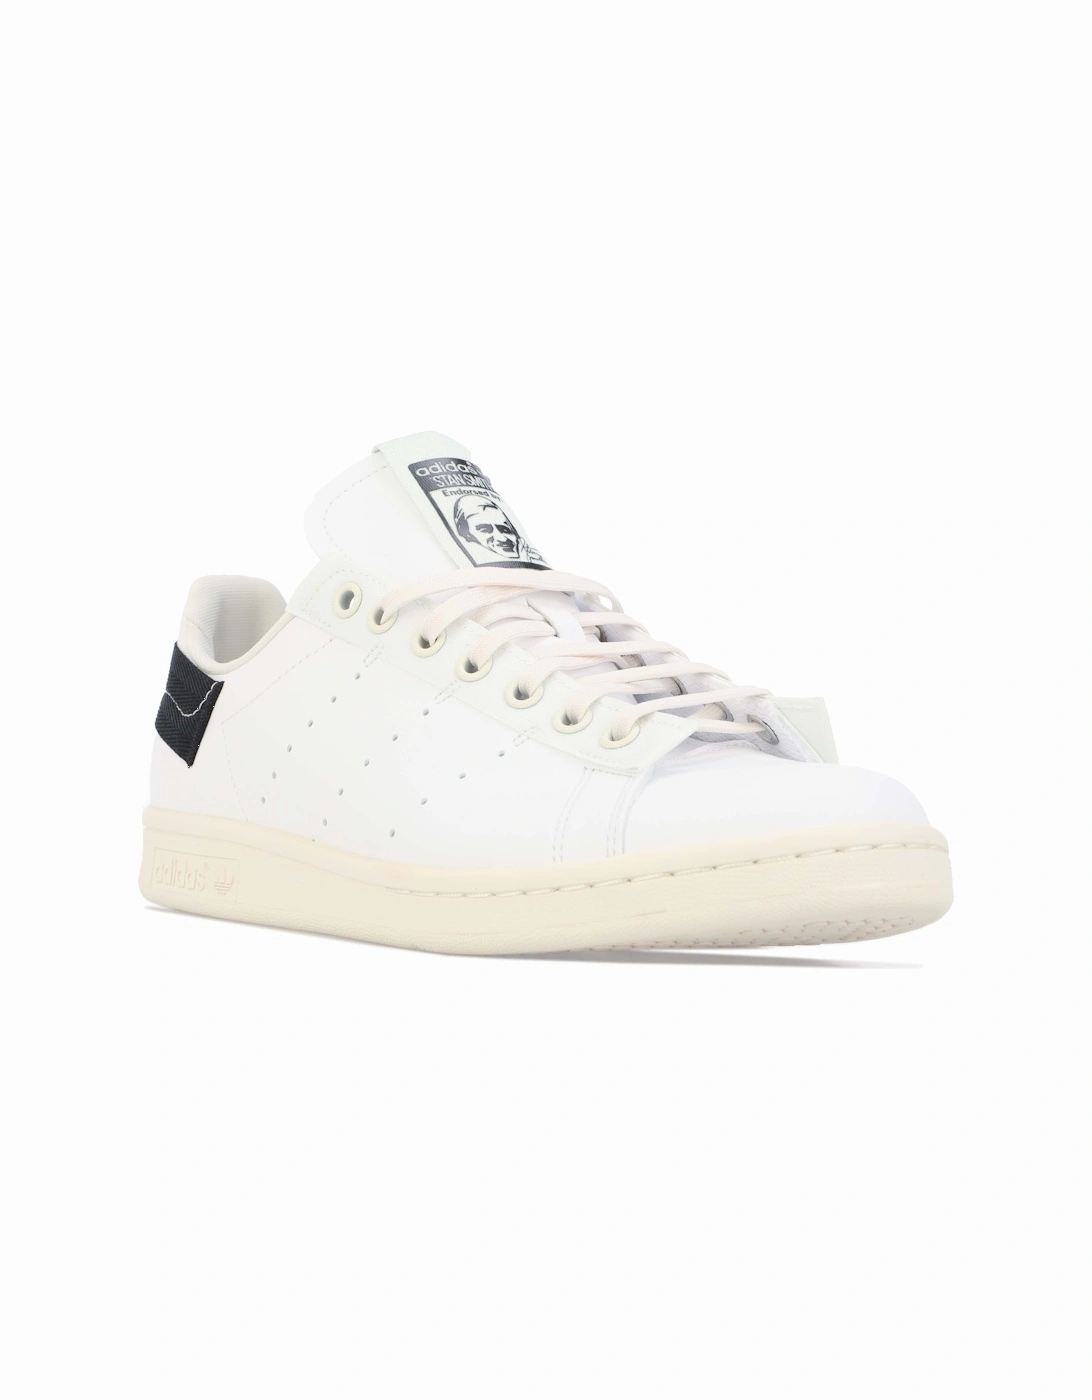 Men's Mens Stan Smith Parley Trainers - White - Size: 10.5